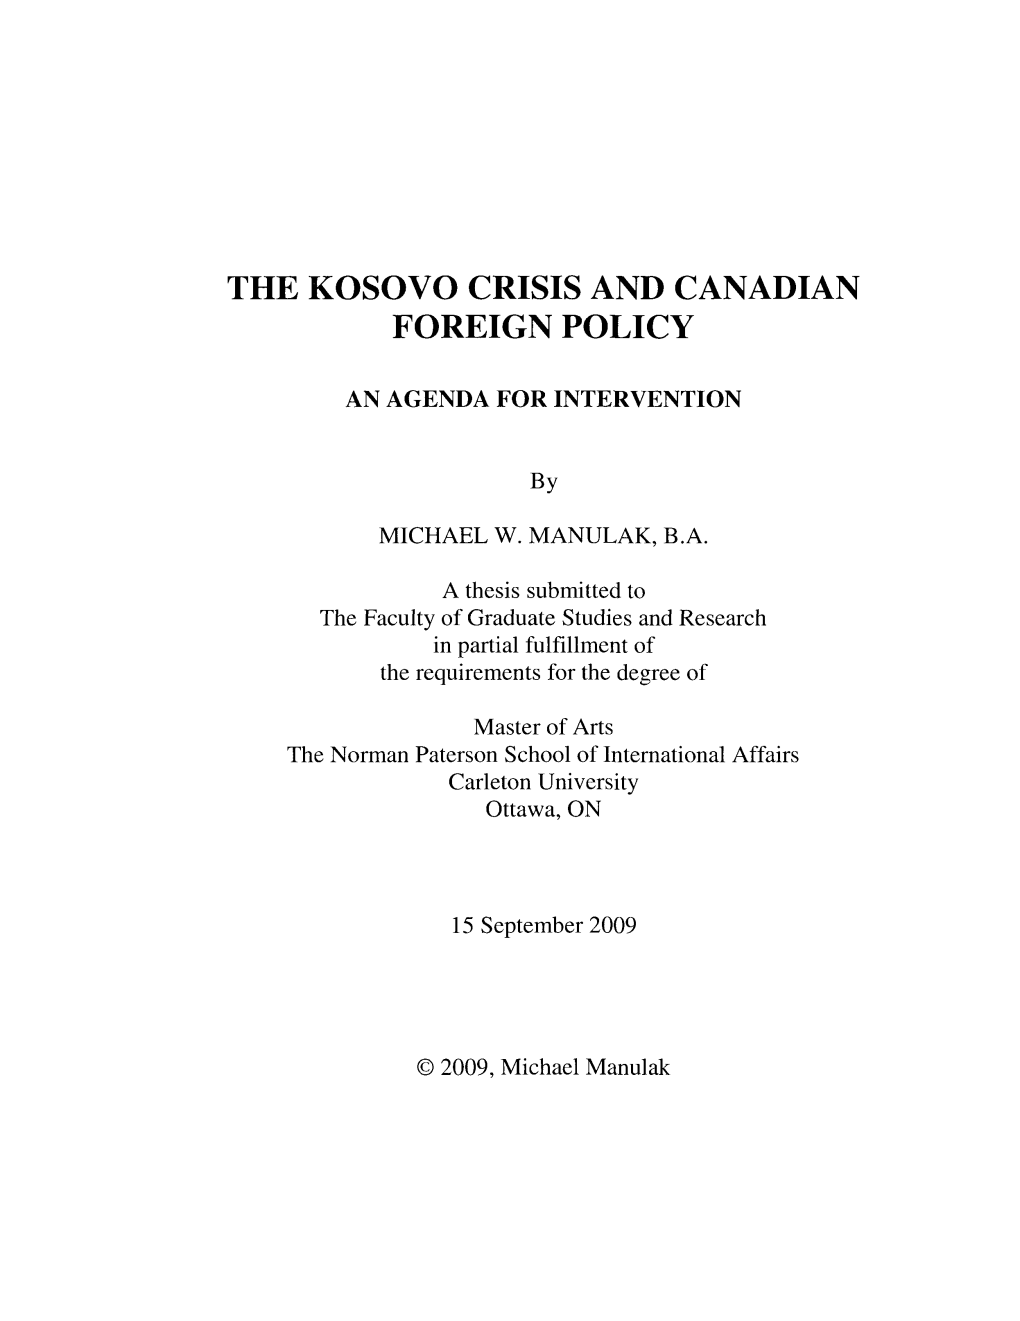 The Kosovo Crisis and Canadian Foreign Policy